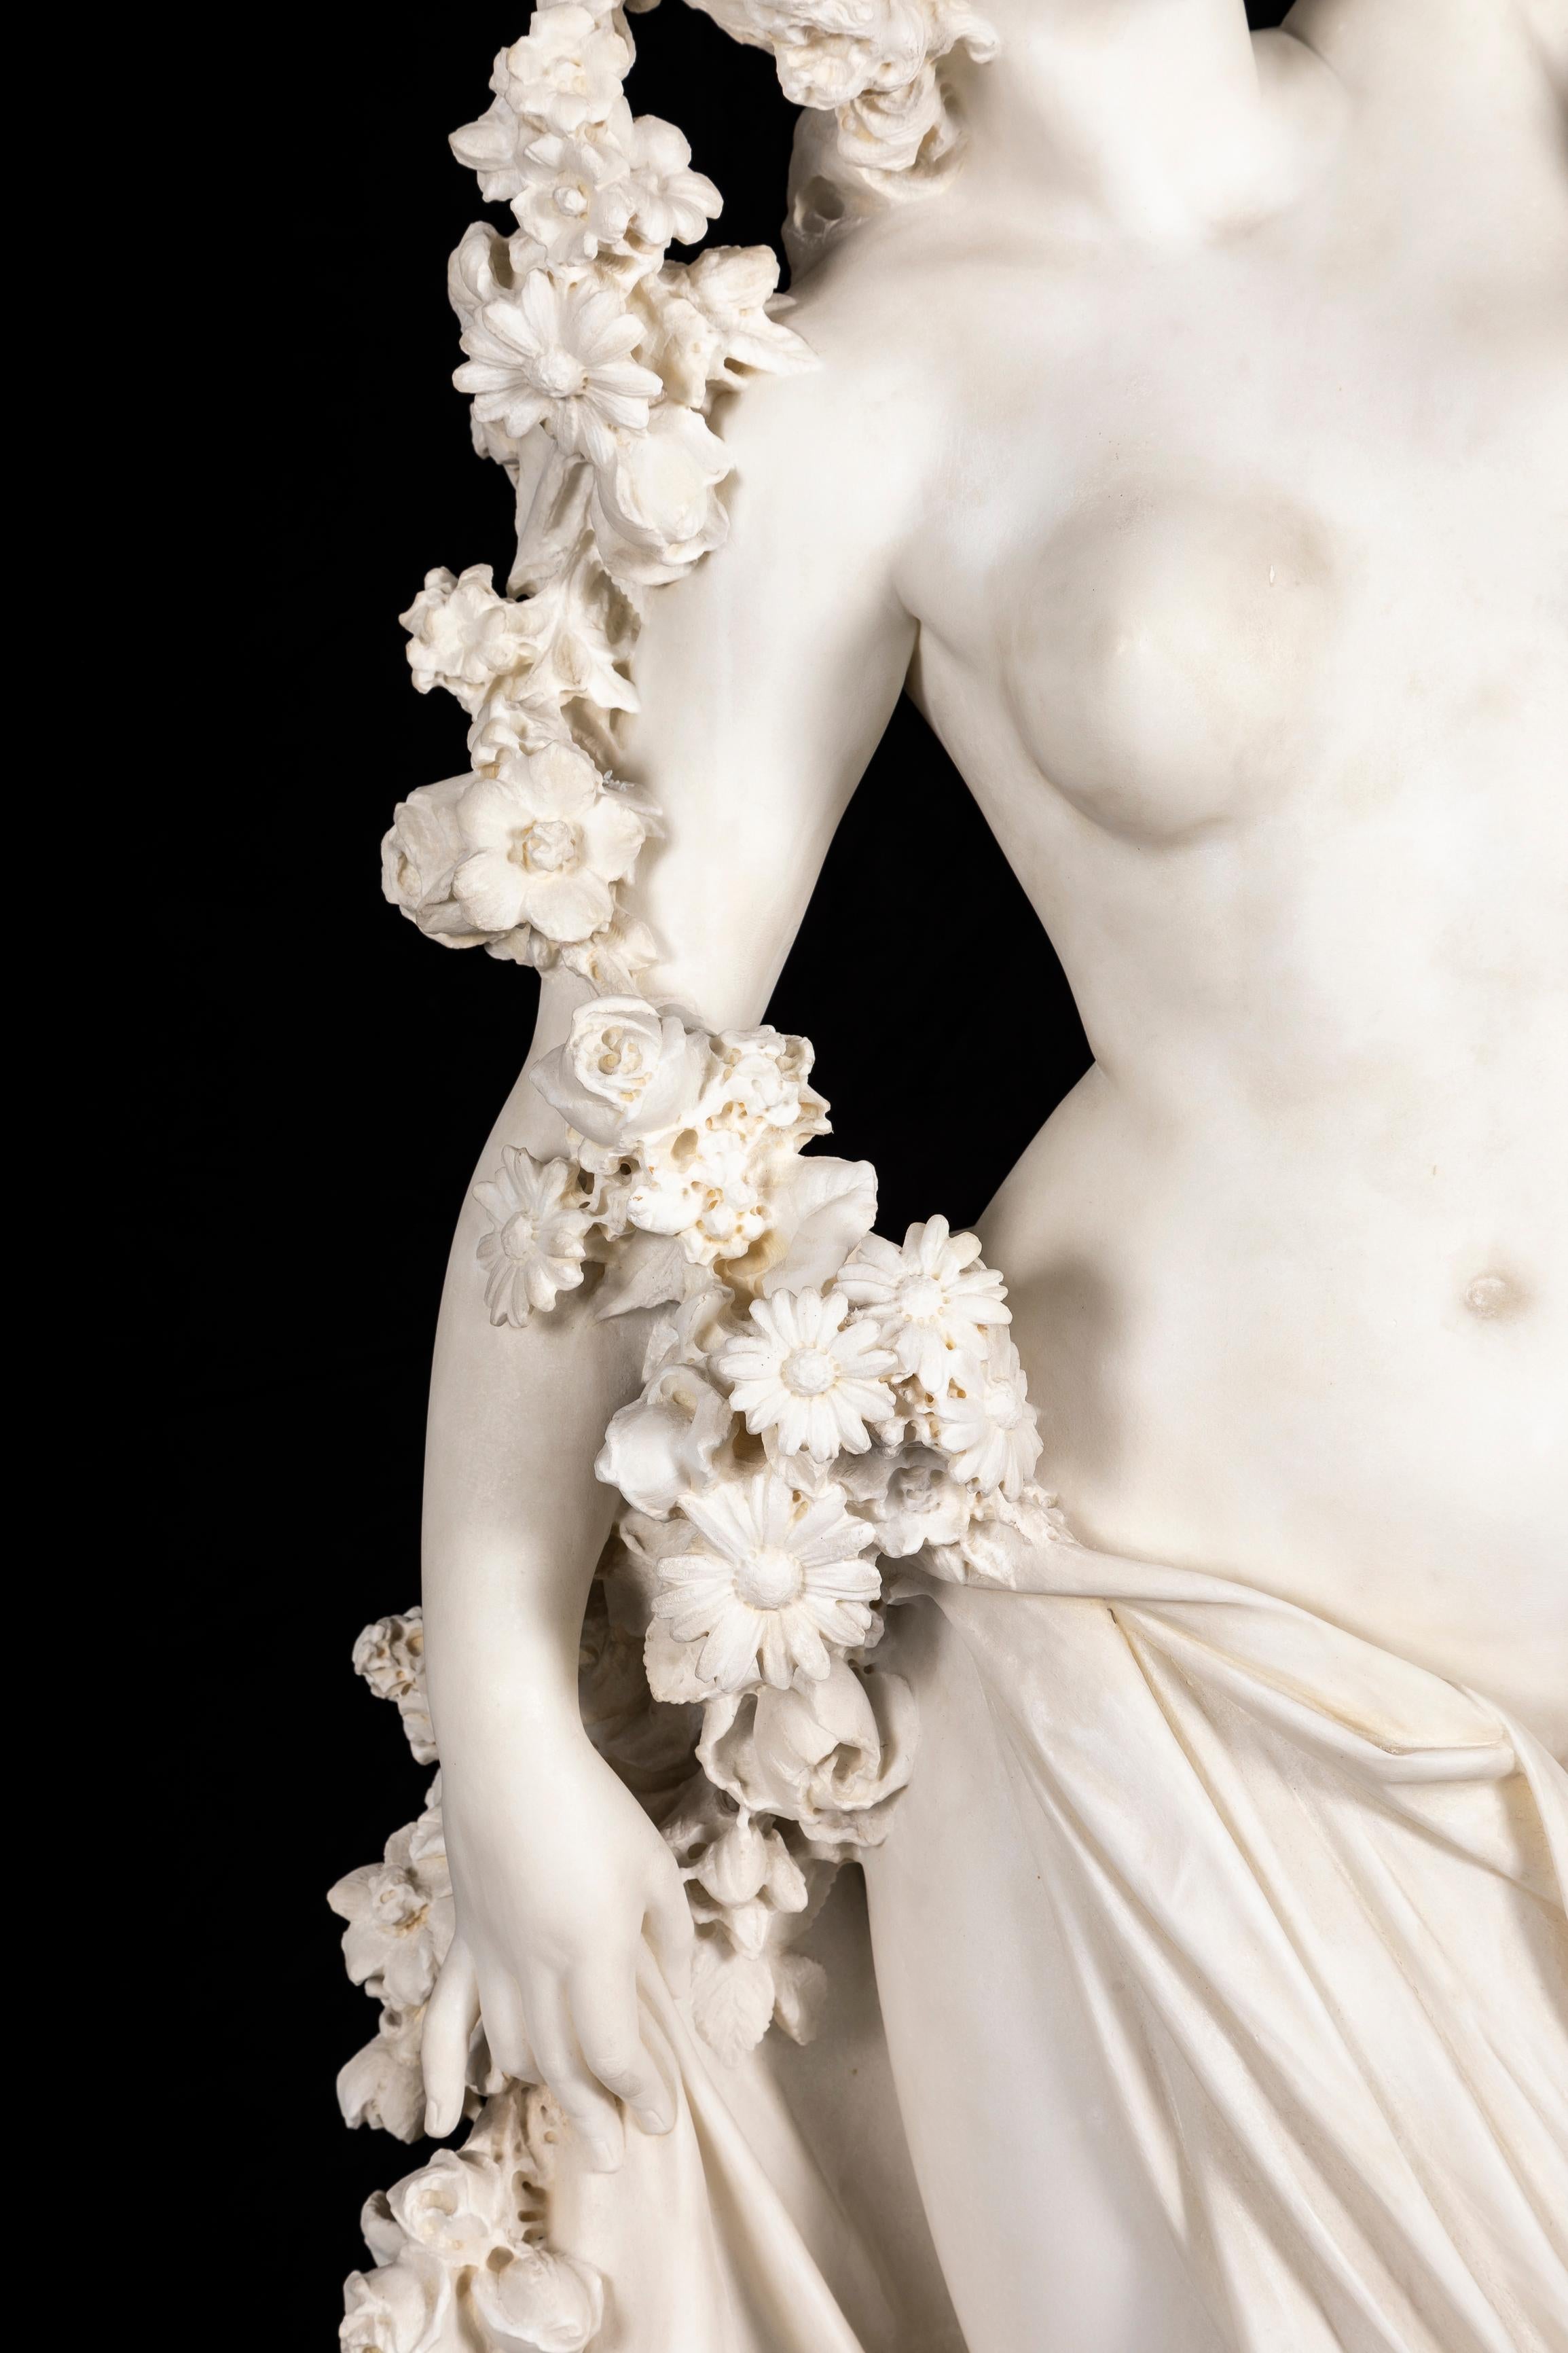 An Italian 19th C. Marble Sculpture of 